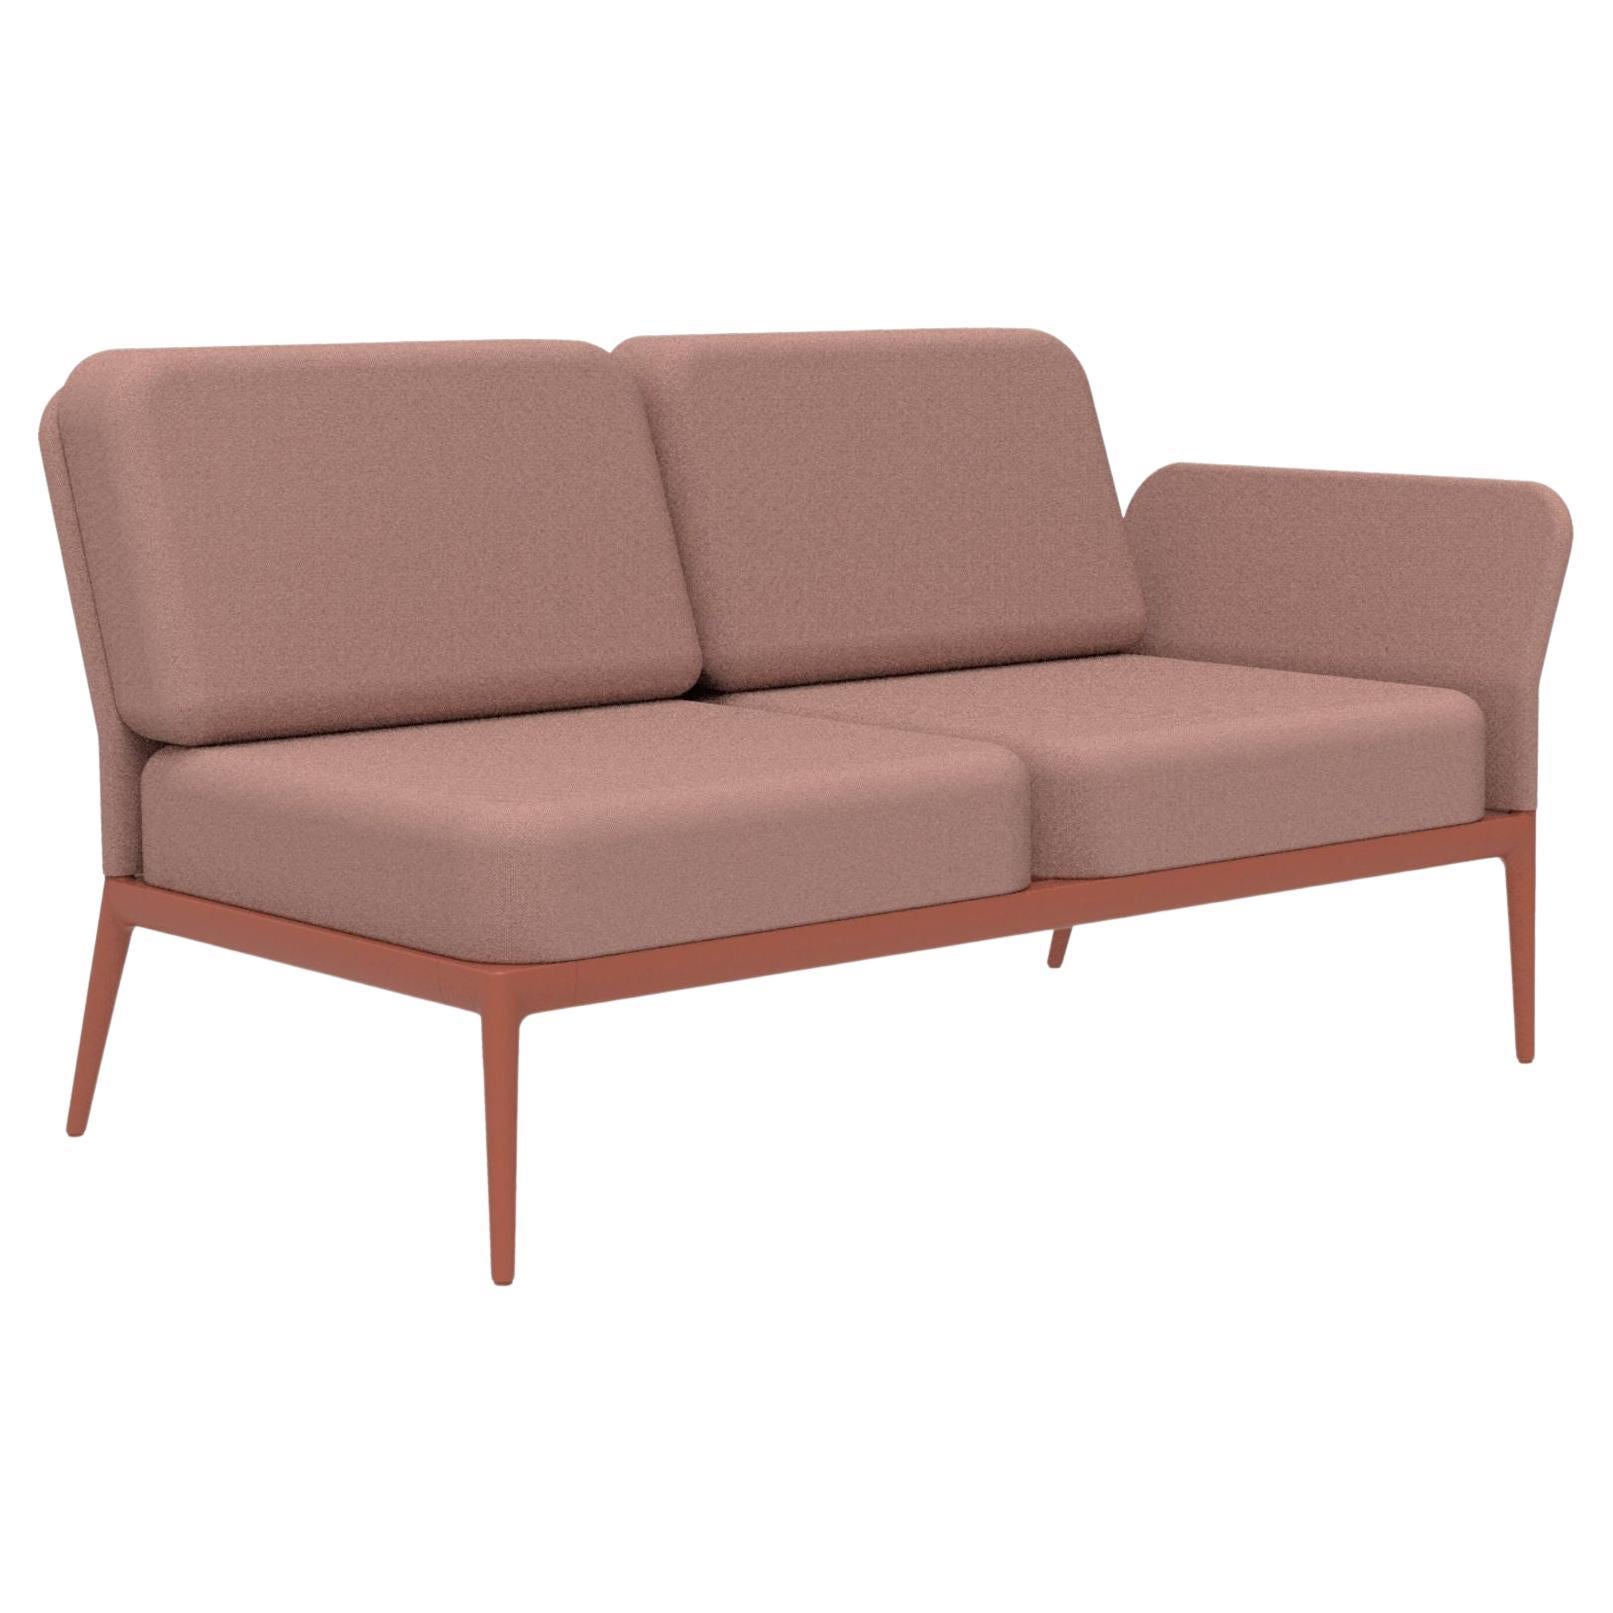 Cover Salmon Double Left Modular Sofa by MOWEE